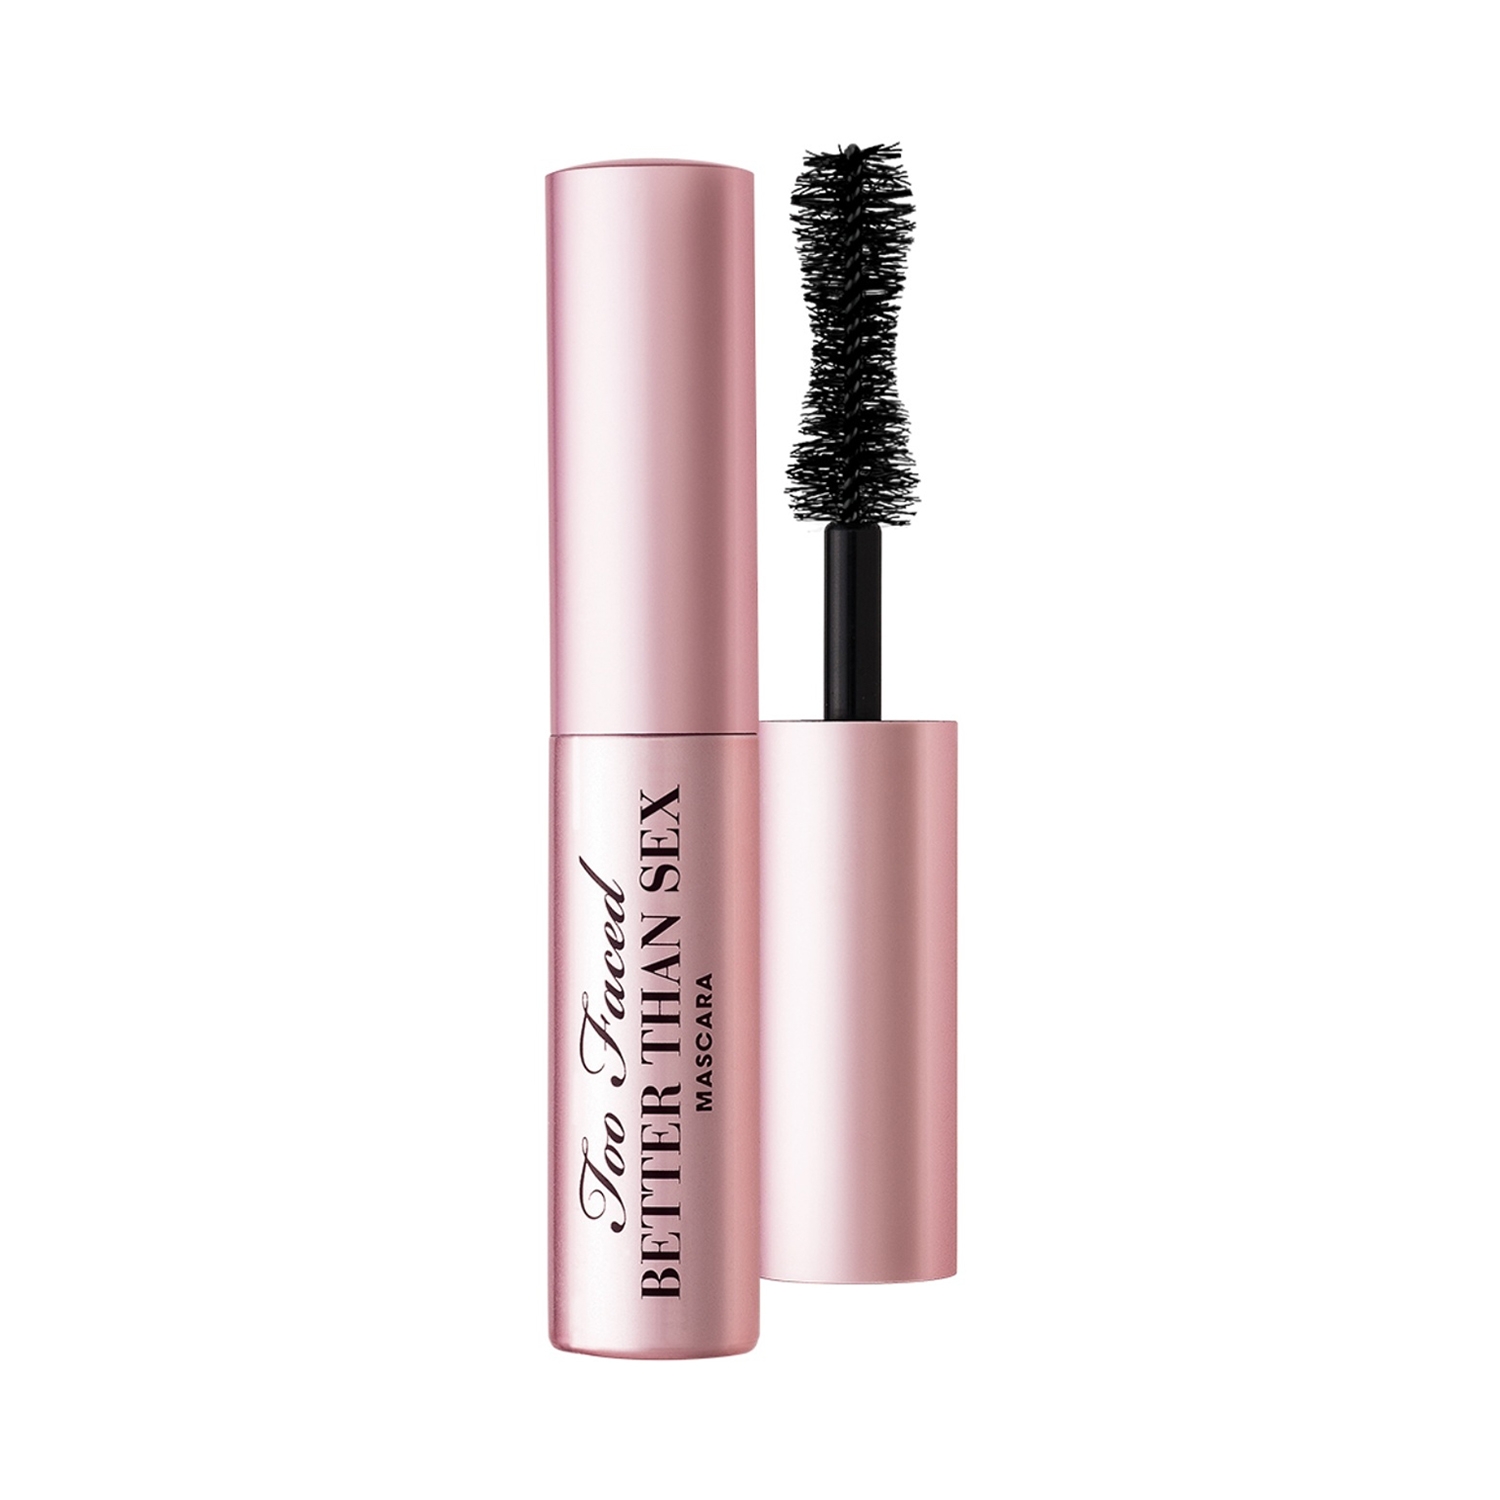 Too Faced Travel Size Better Than Sex Mascara, Black - (4.8g)